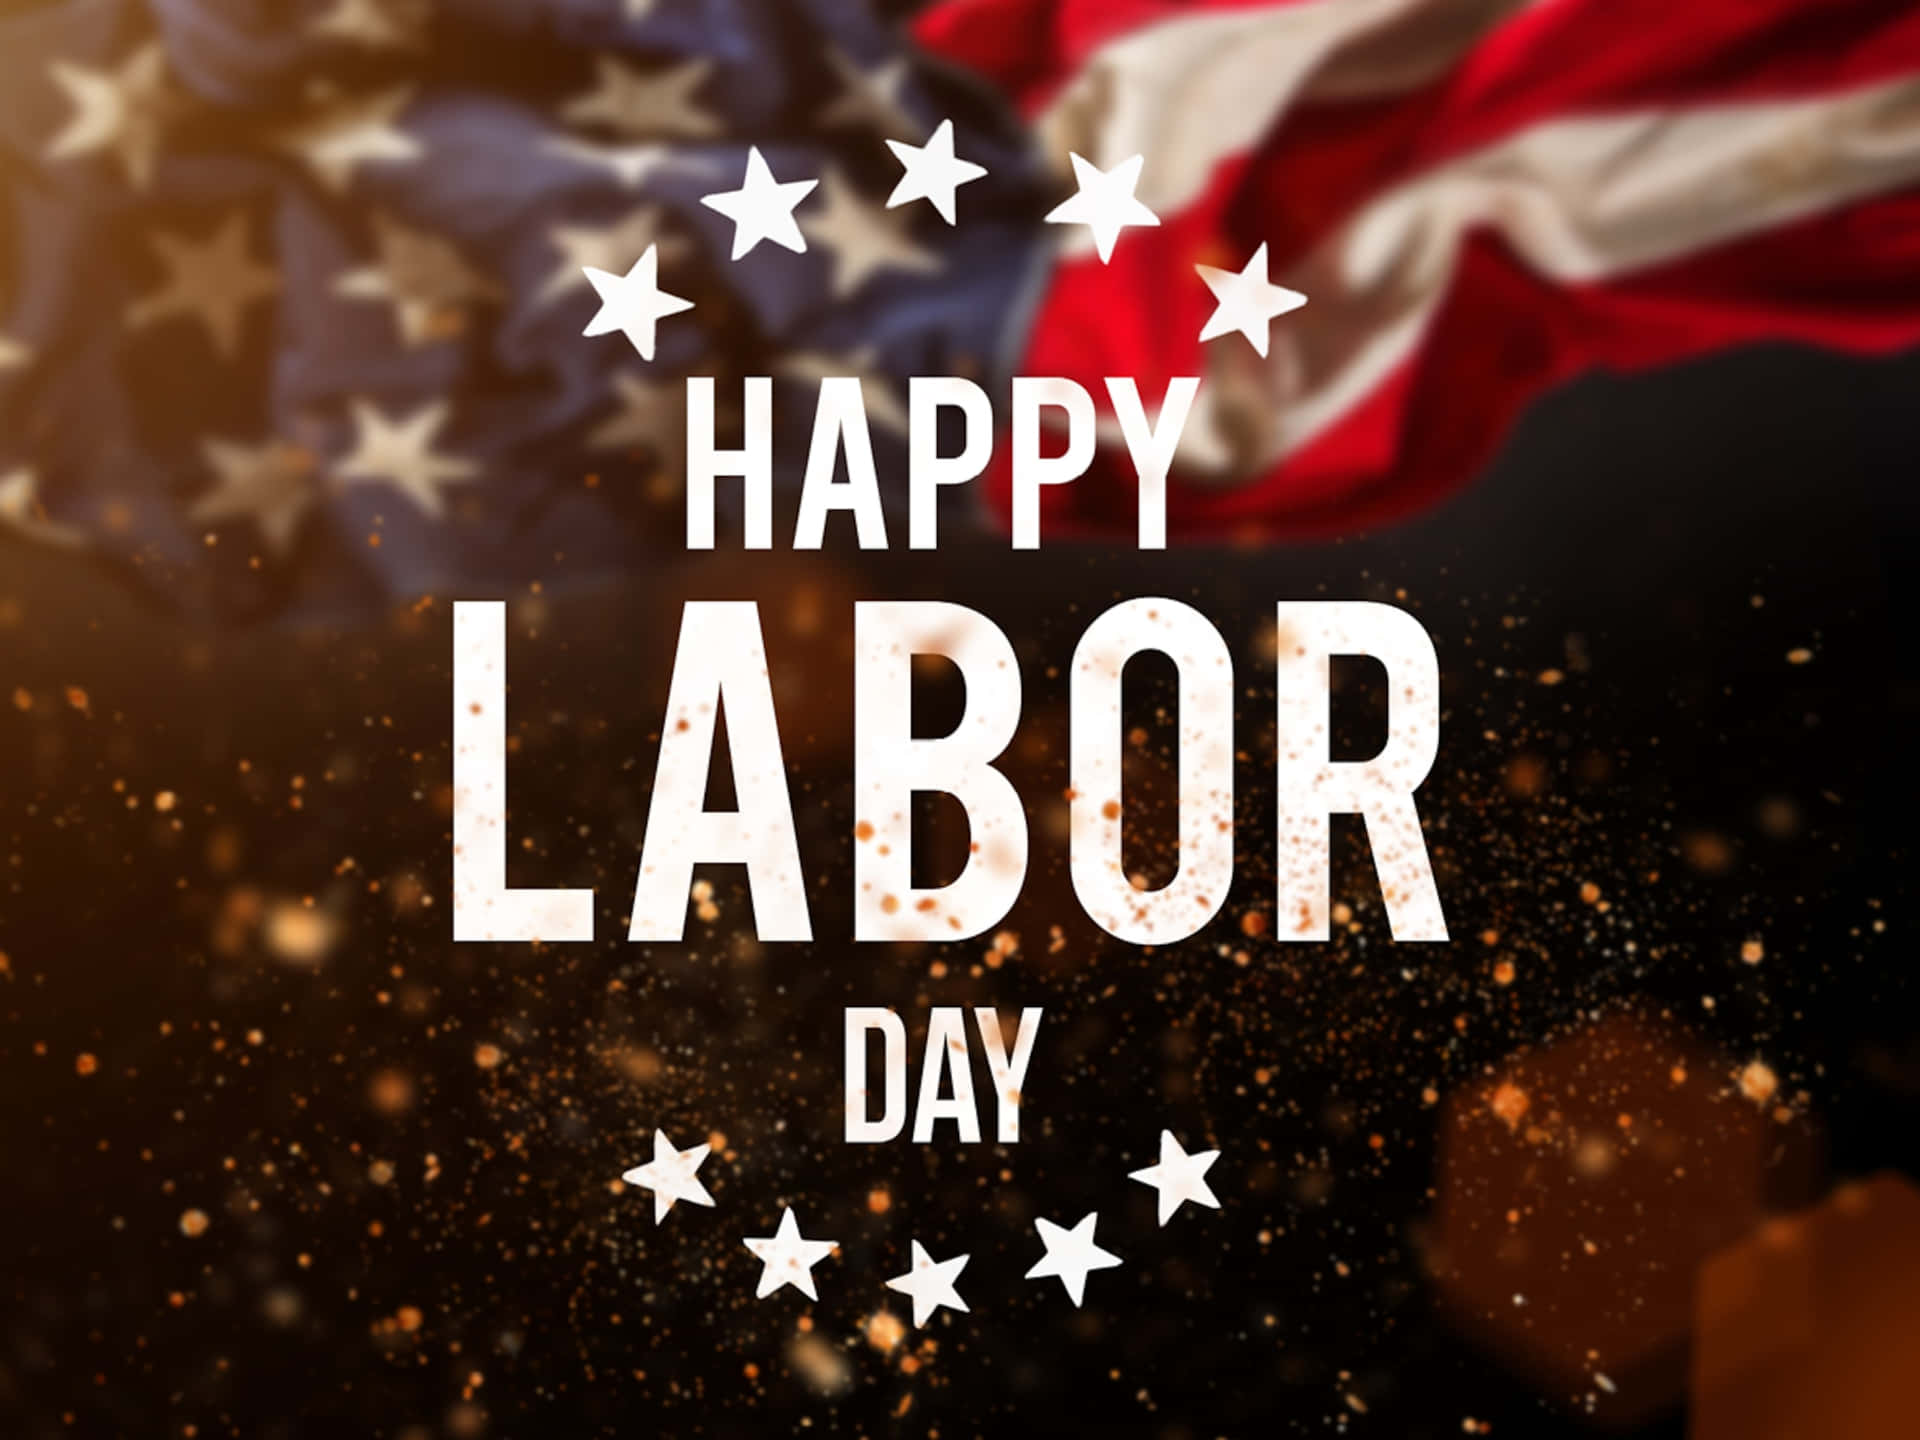 Celebrate the fruits of your labor this Labor Day!